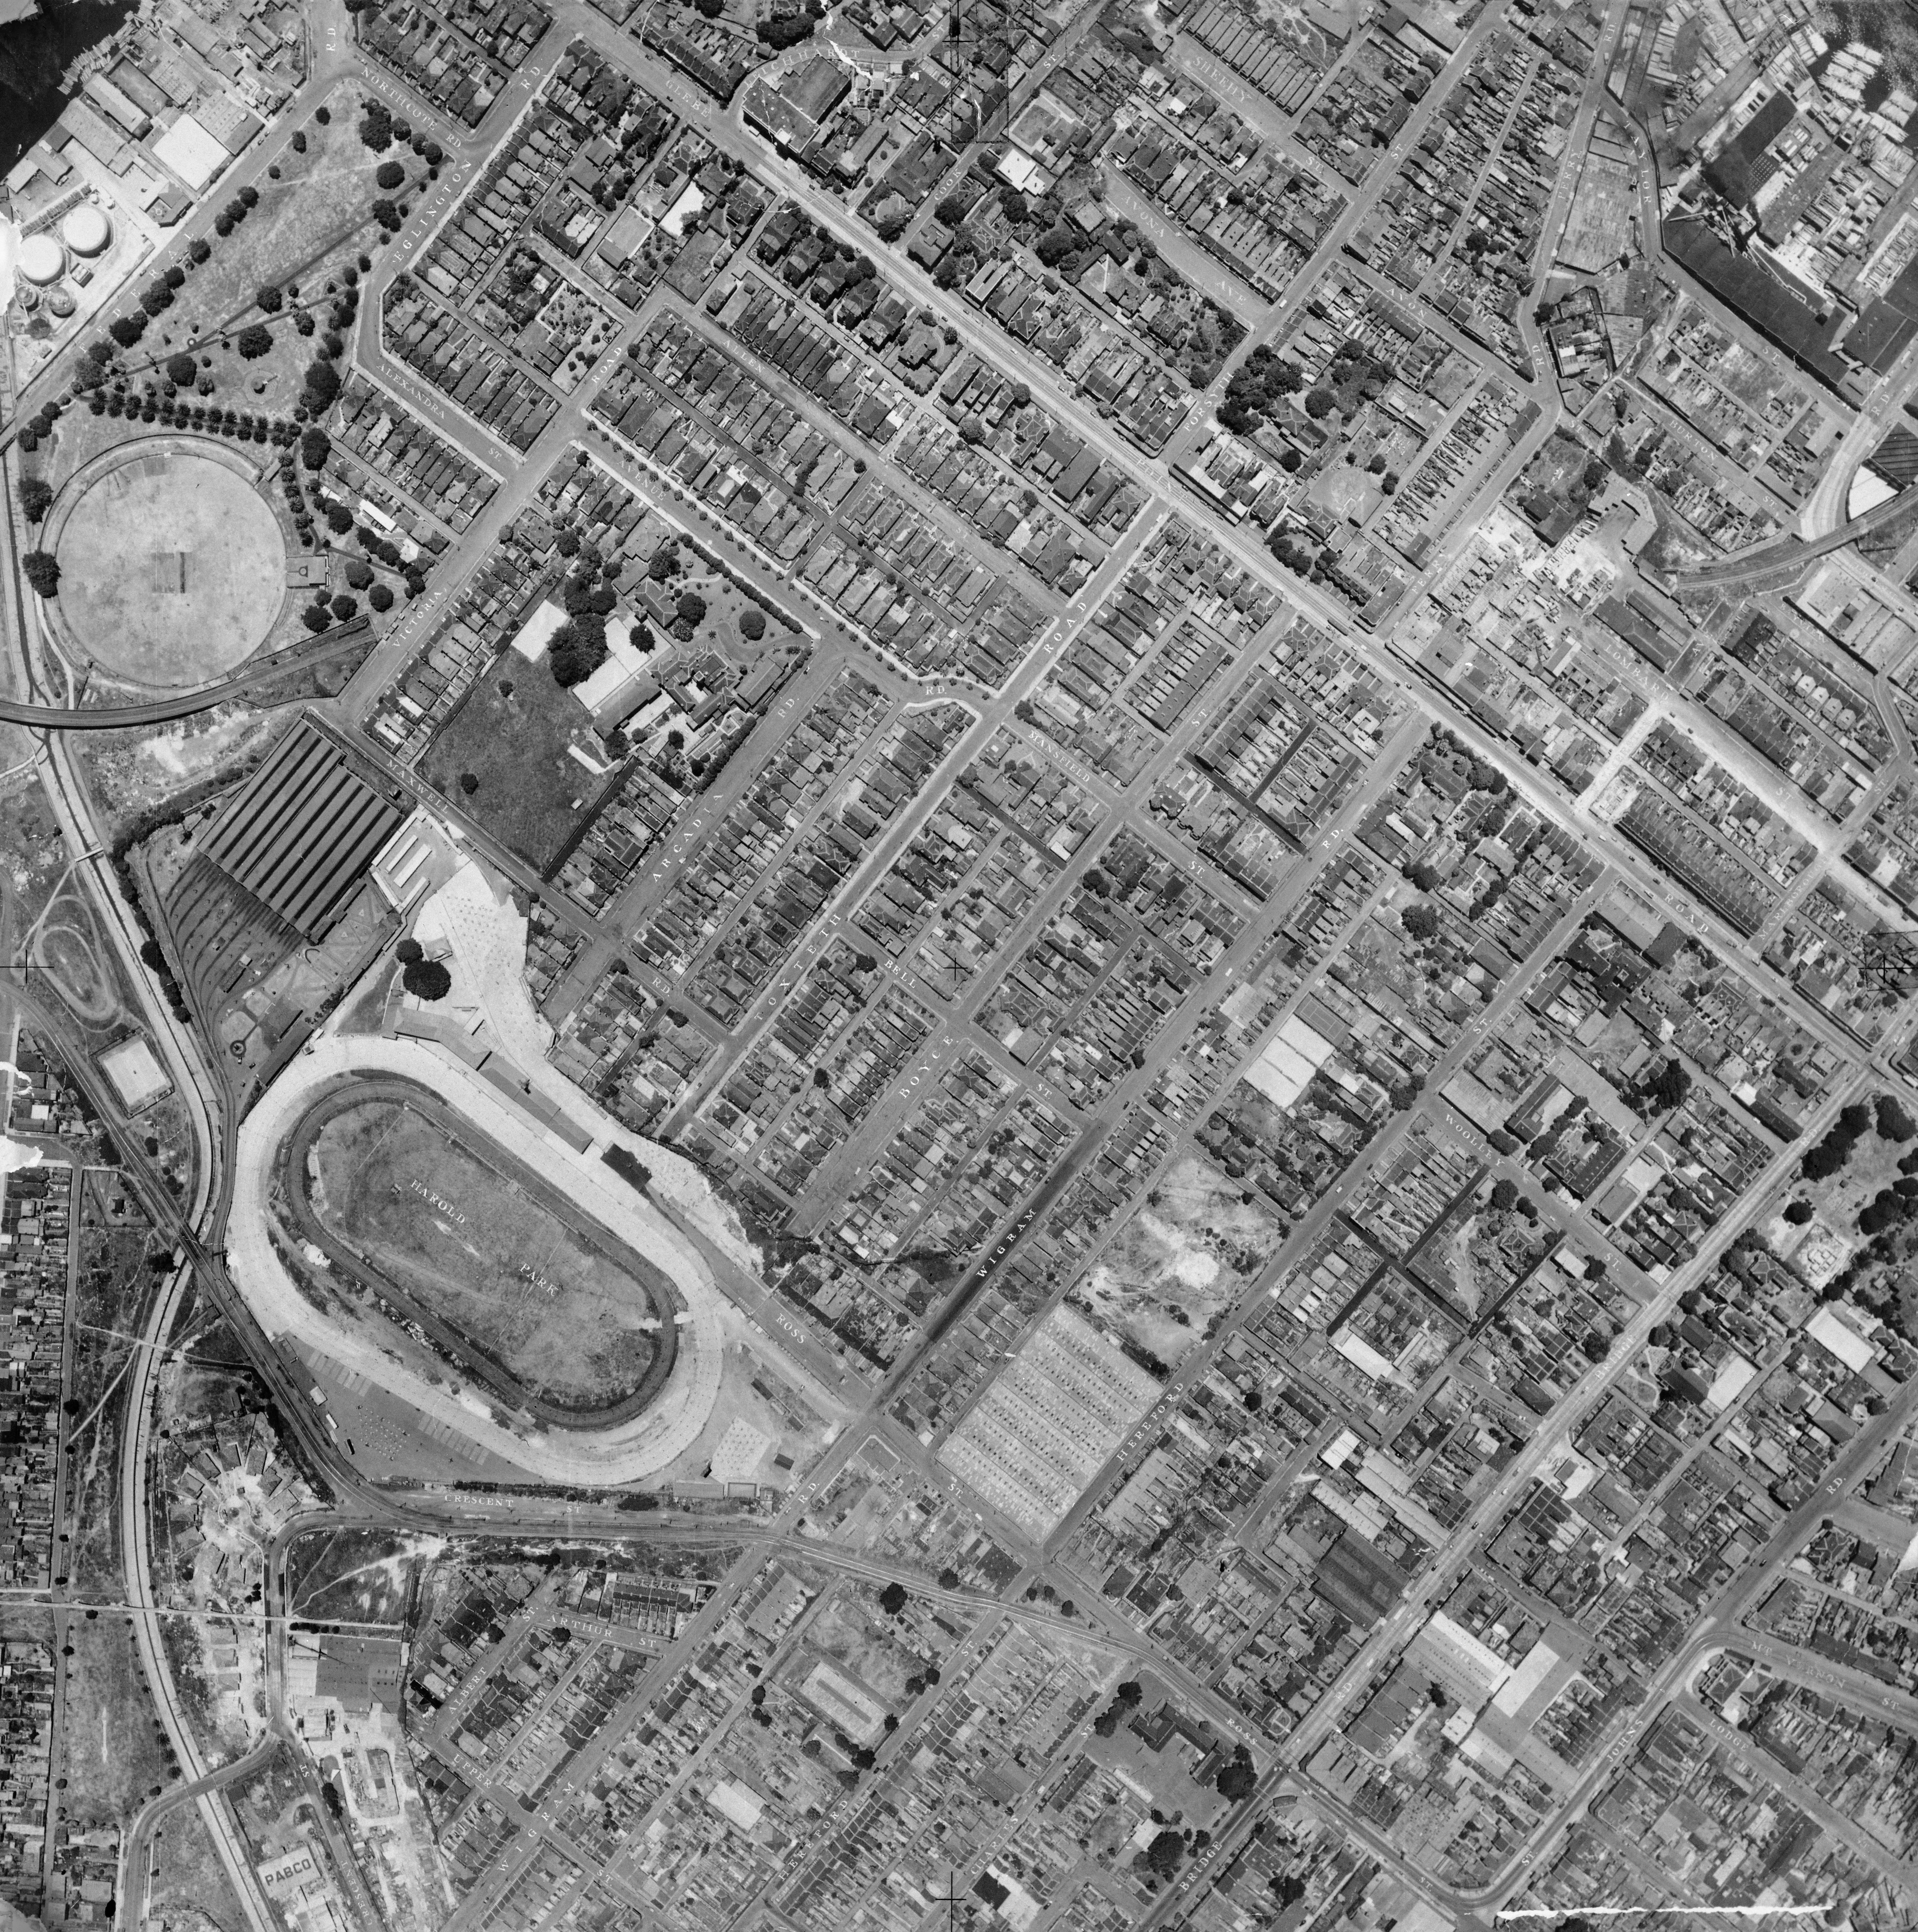 Aerial survey of the City of Sydney area showing Harold Park to the left, 1949. Credit: Historic Atlas of Sydney, City of Sydney Archives.